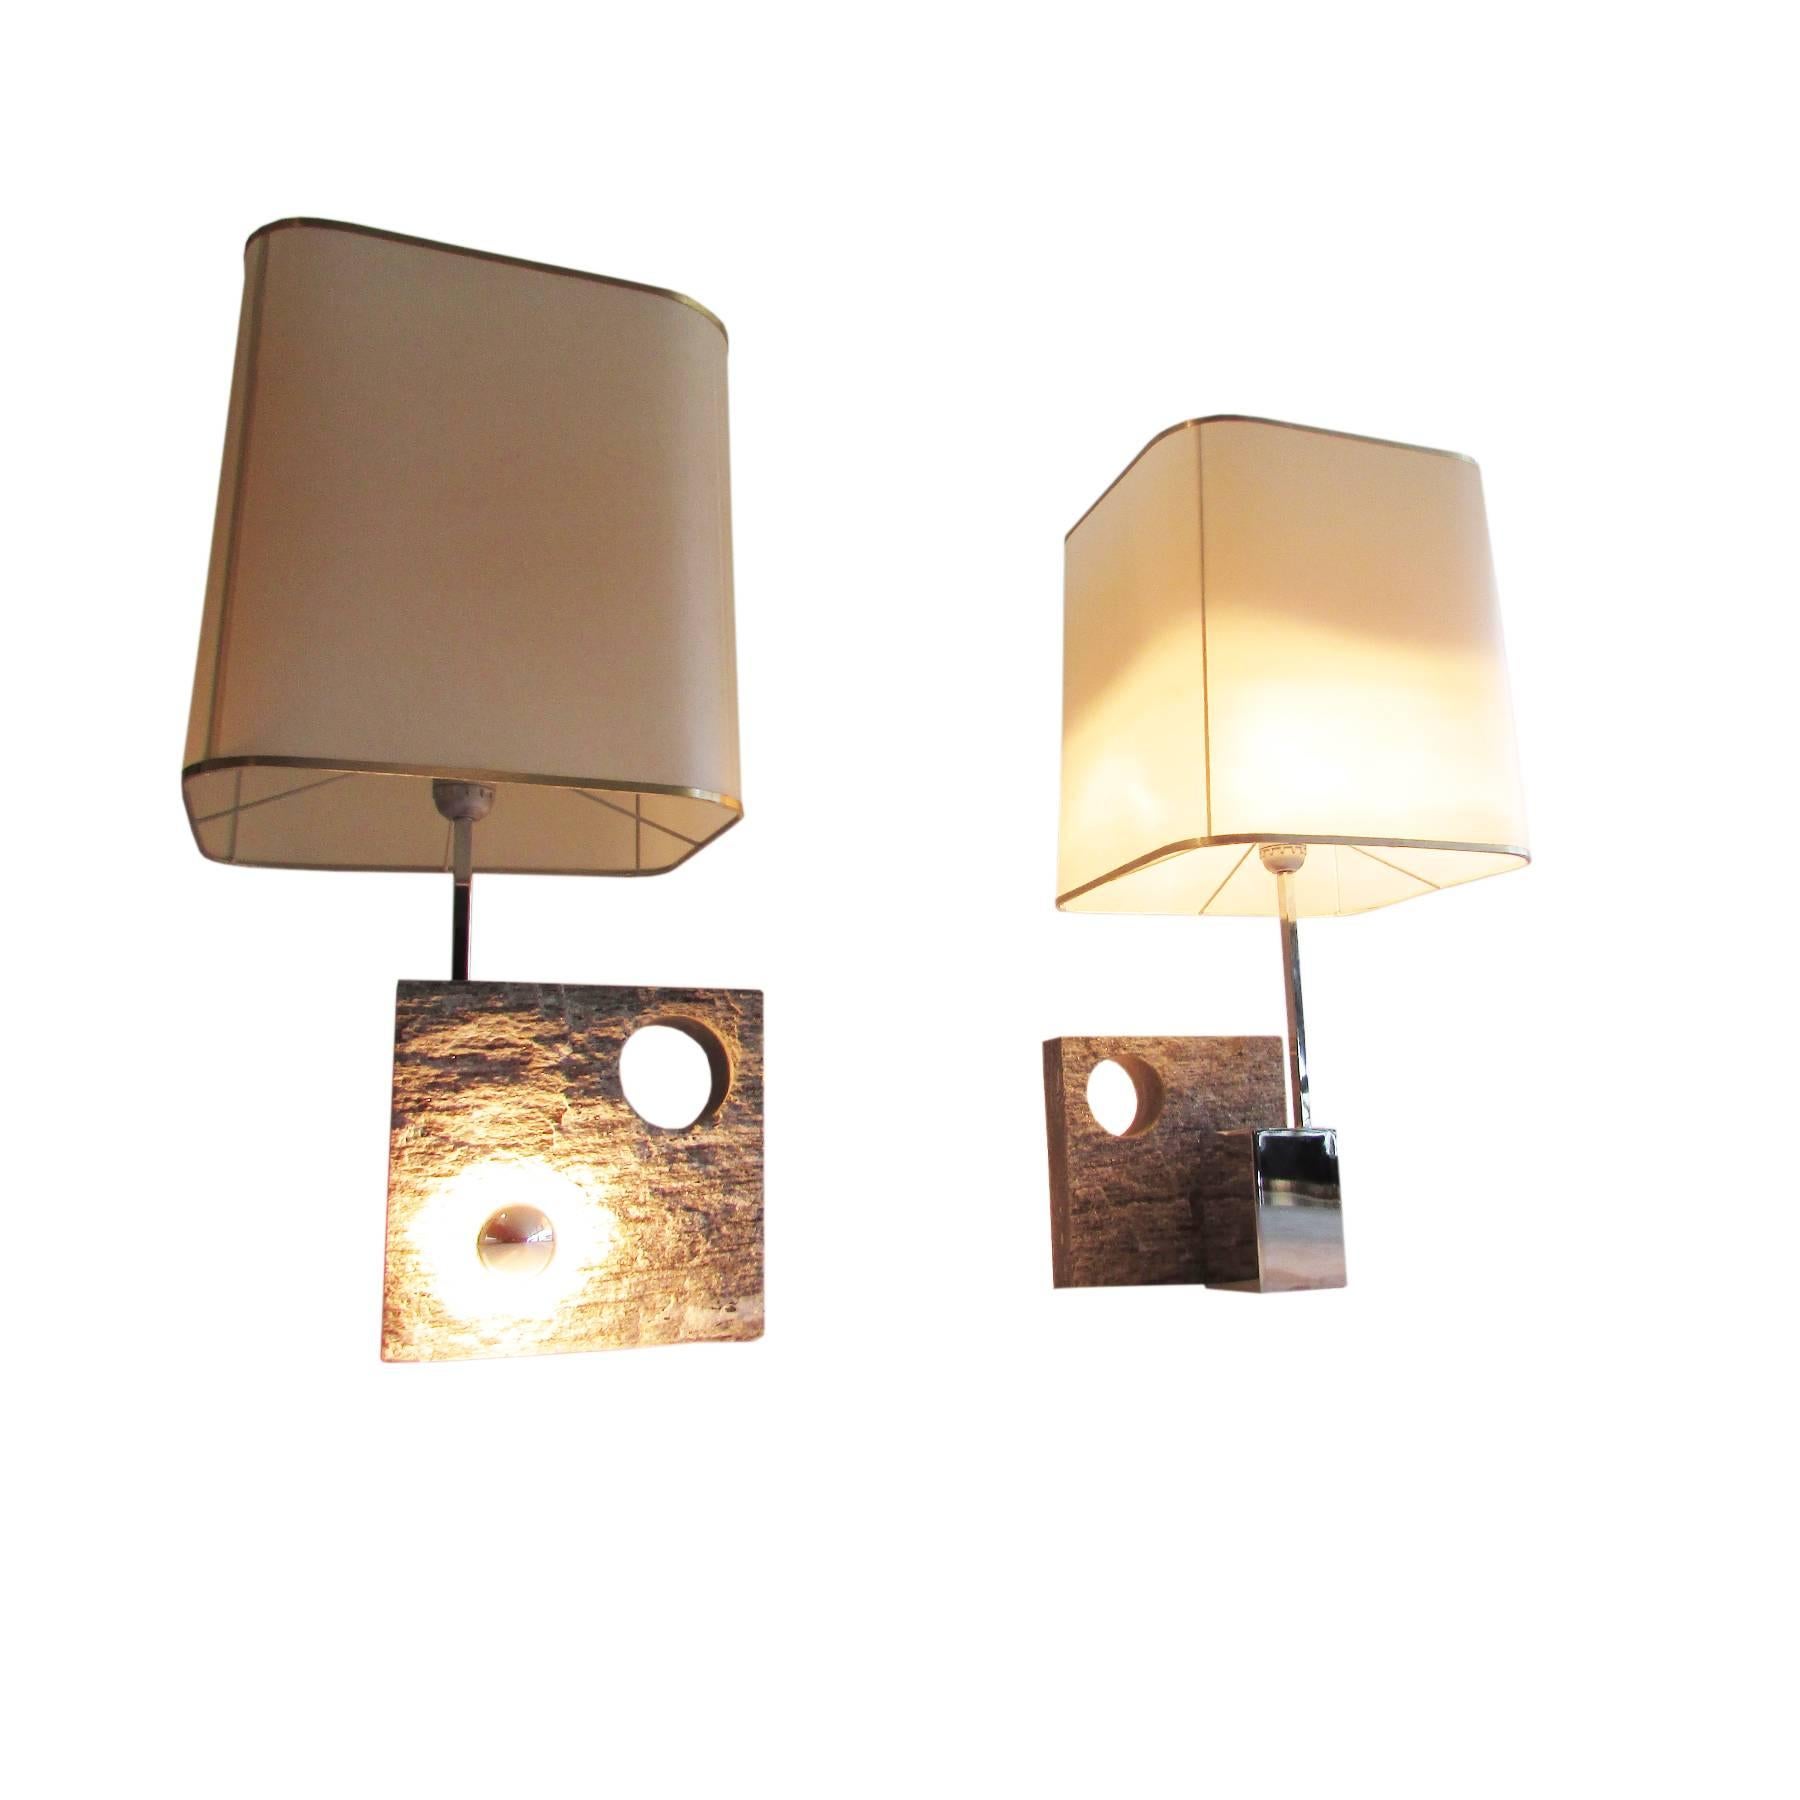 Set of two French table lamps coming from the chic ski resort of Courchevel.
Perforated slate base with chrome structure and perspex shade.
The lamps have two bulbs each, one under the shade and another, smaller and mirrored, at the back of the